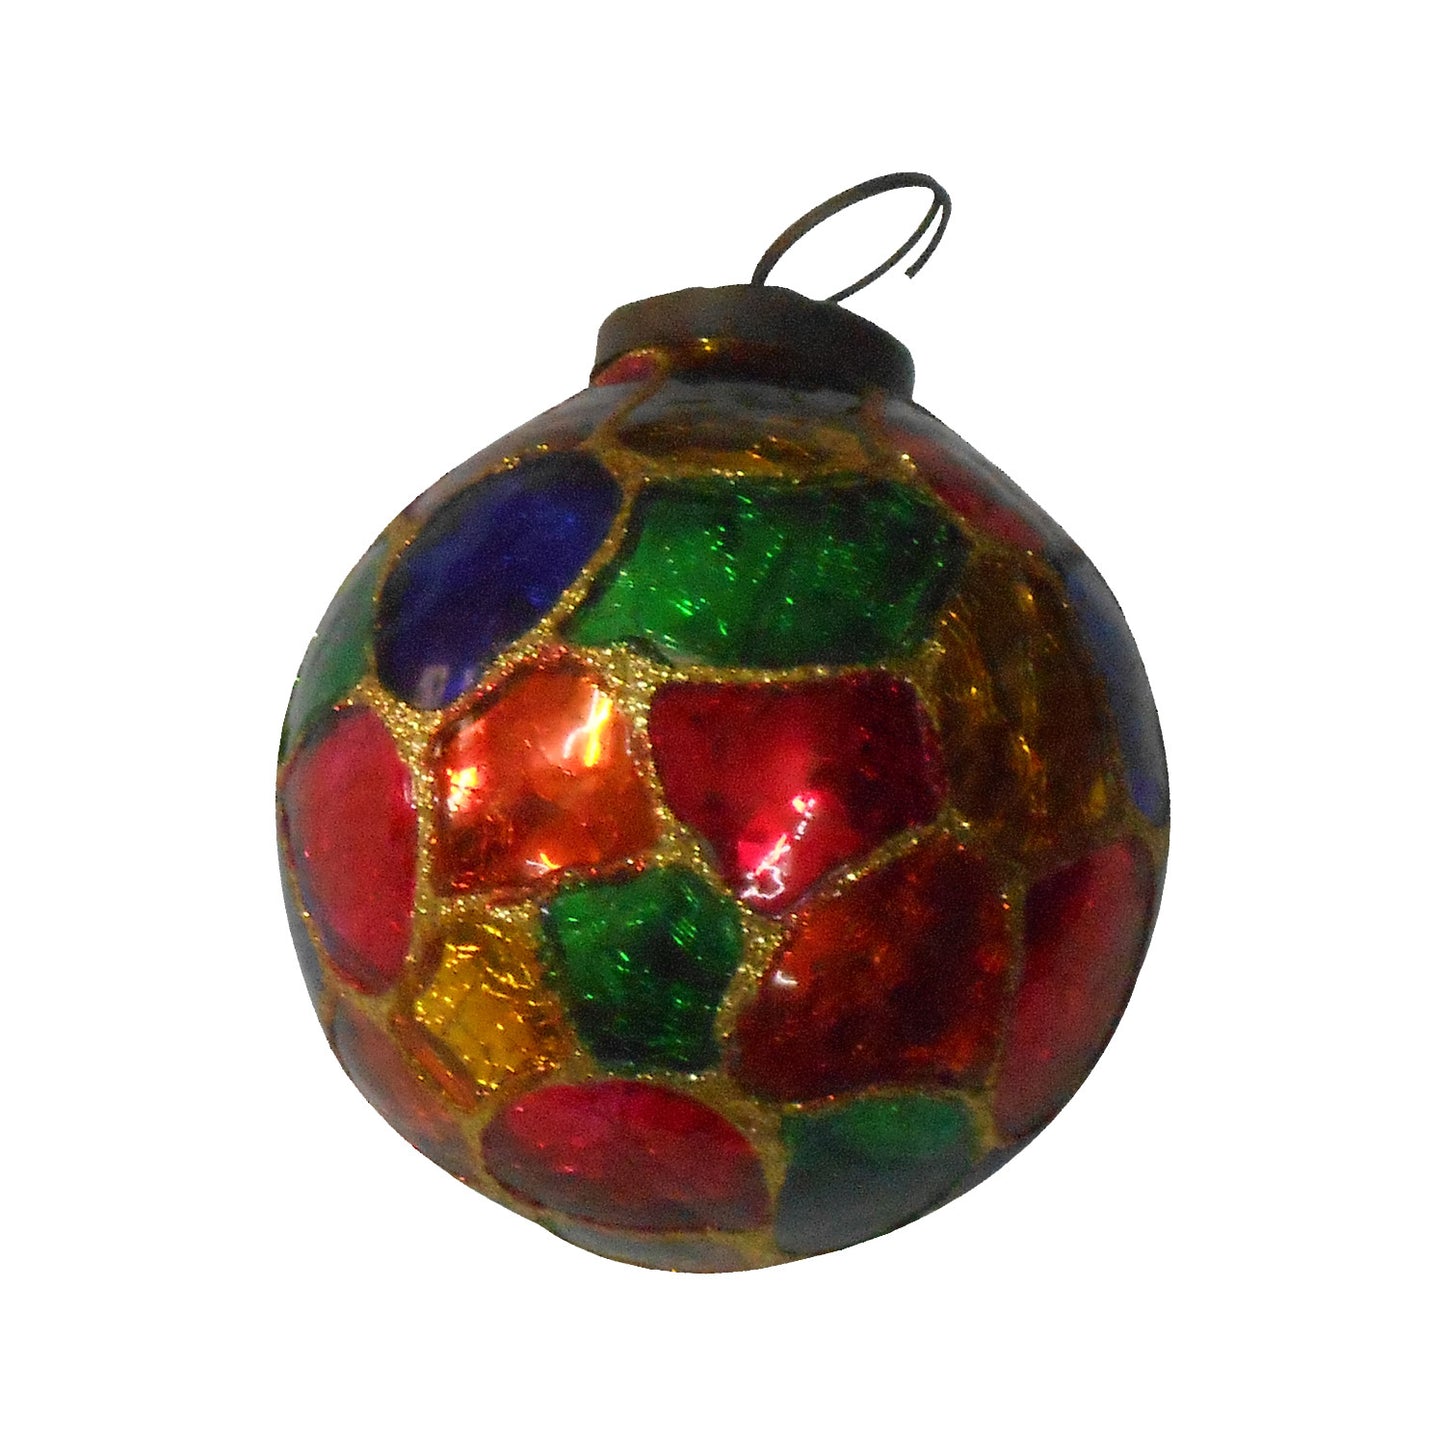 GiftBay Creations ORN-125(S/12) Antique-look Glass Ornament 3" H, Set of 12 for Christmas Tree Decoration